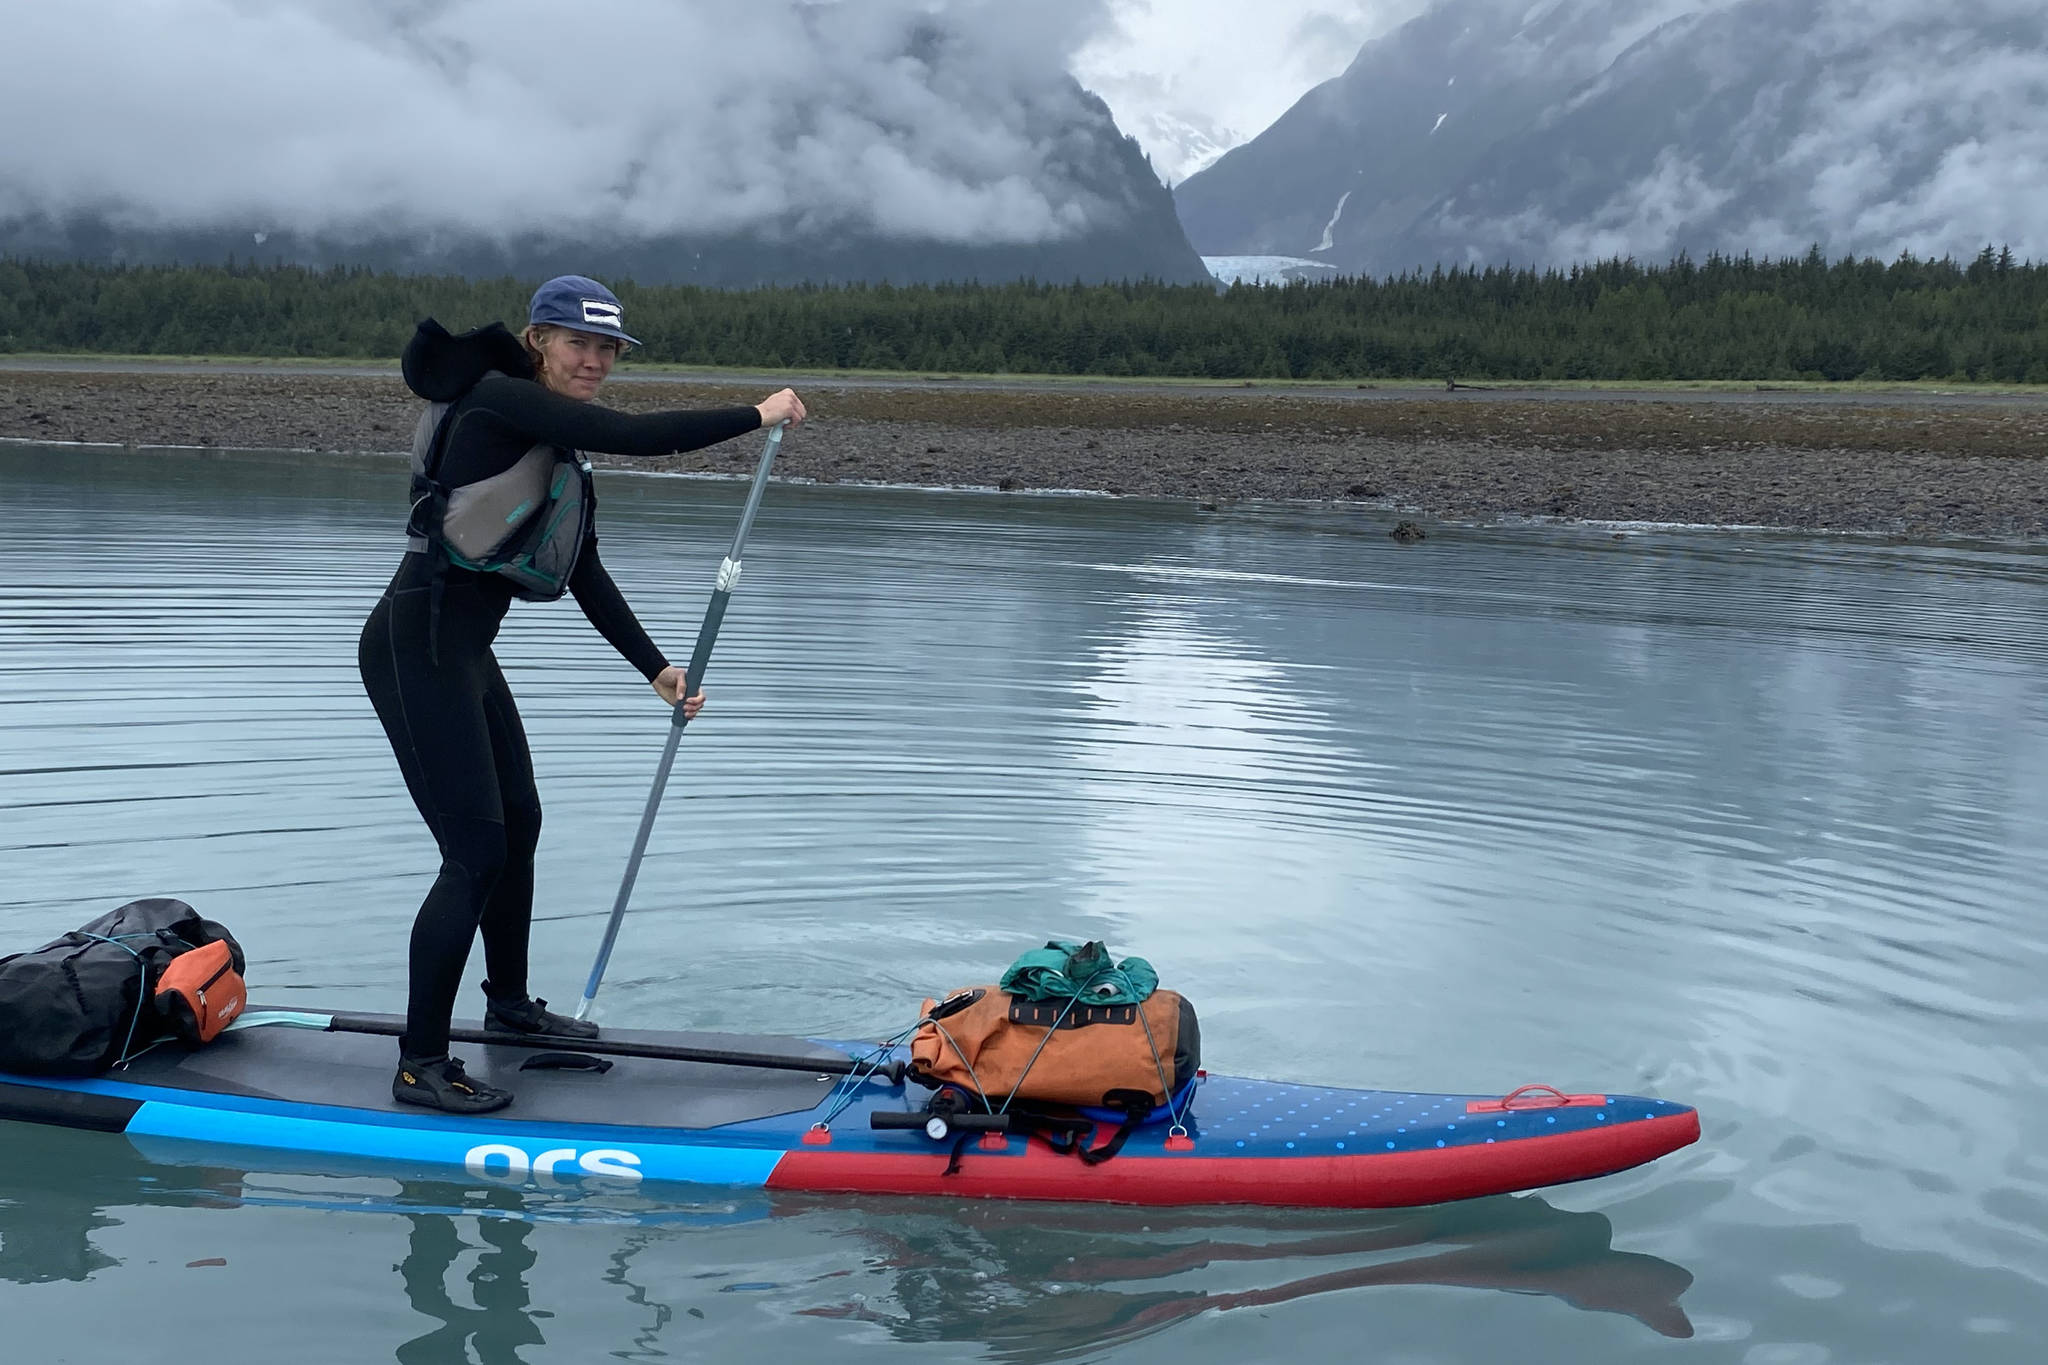 Kaitlyn Tolin, pictured, paddled with partner Amanda Painter from Juneau to Haines over three days in early July. They said they were inspired by friends who had made similar paddleboard trips. (Courtesy photo | Kaitlyn Tolin)